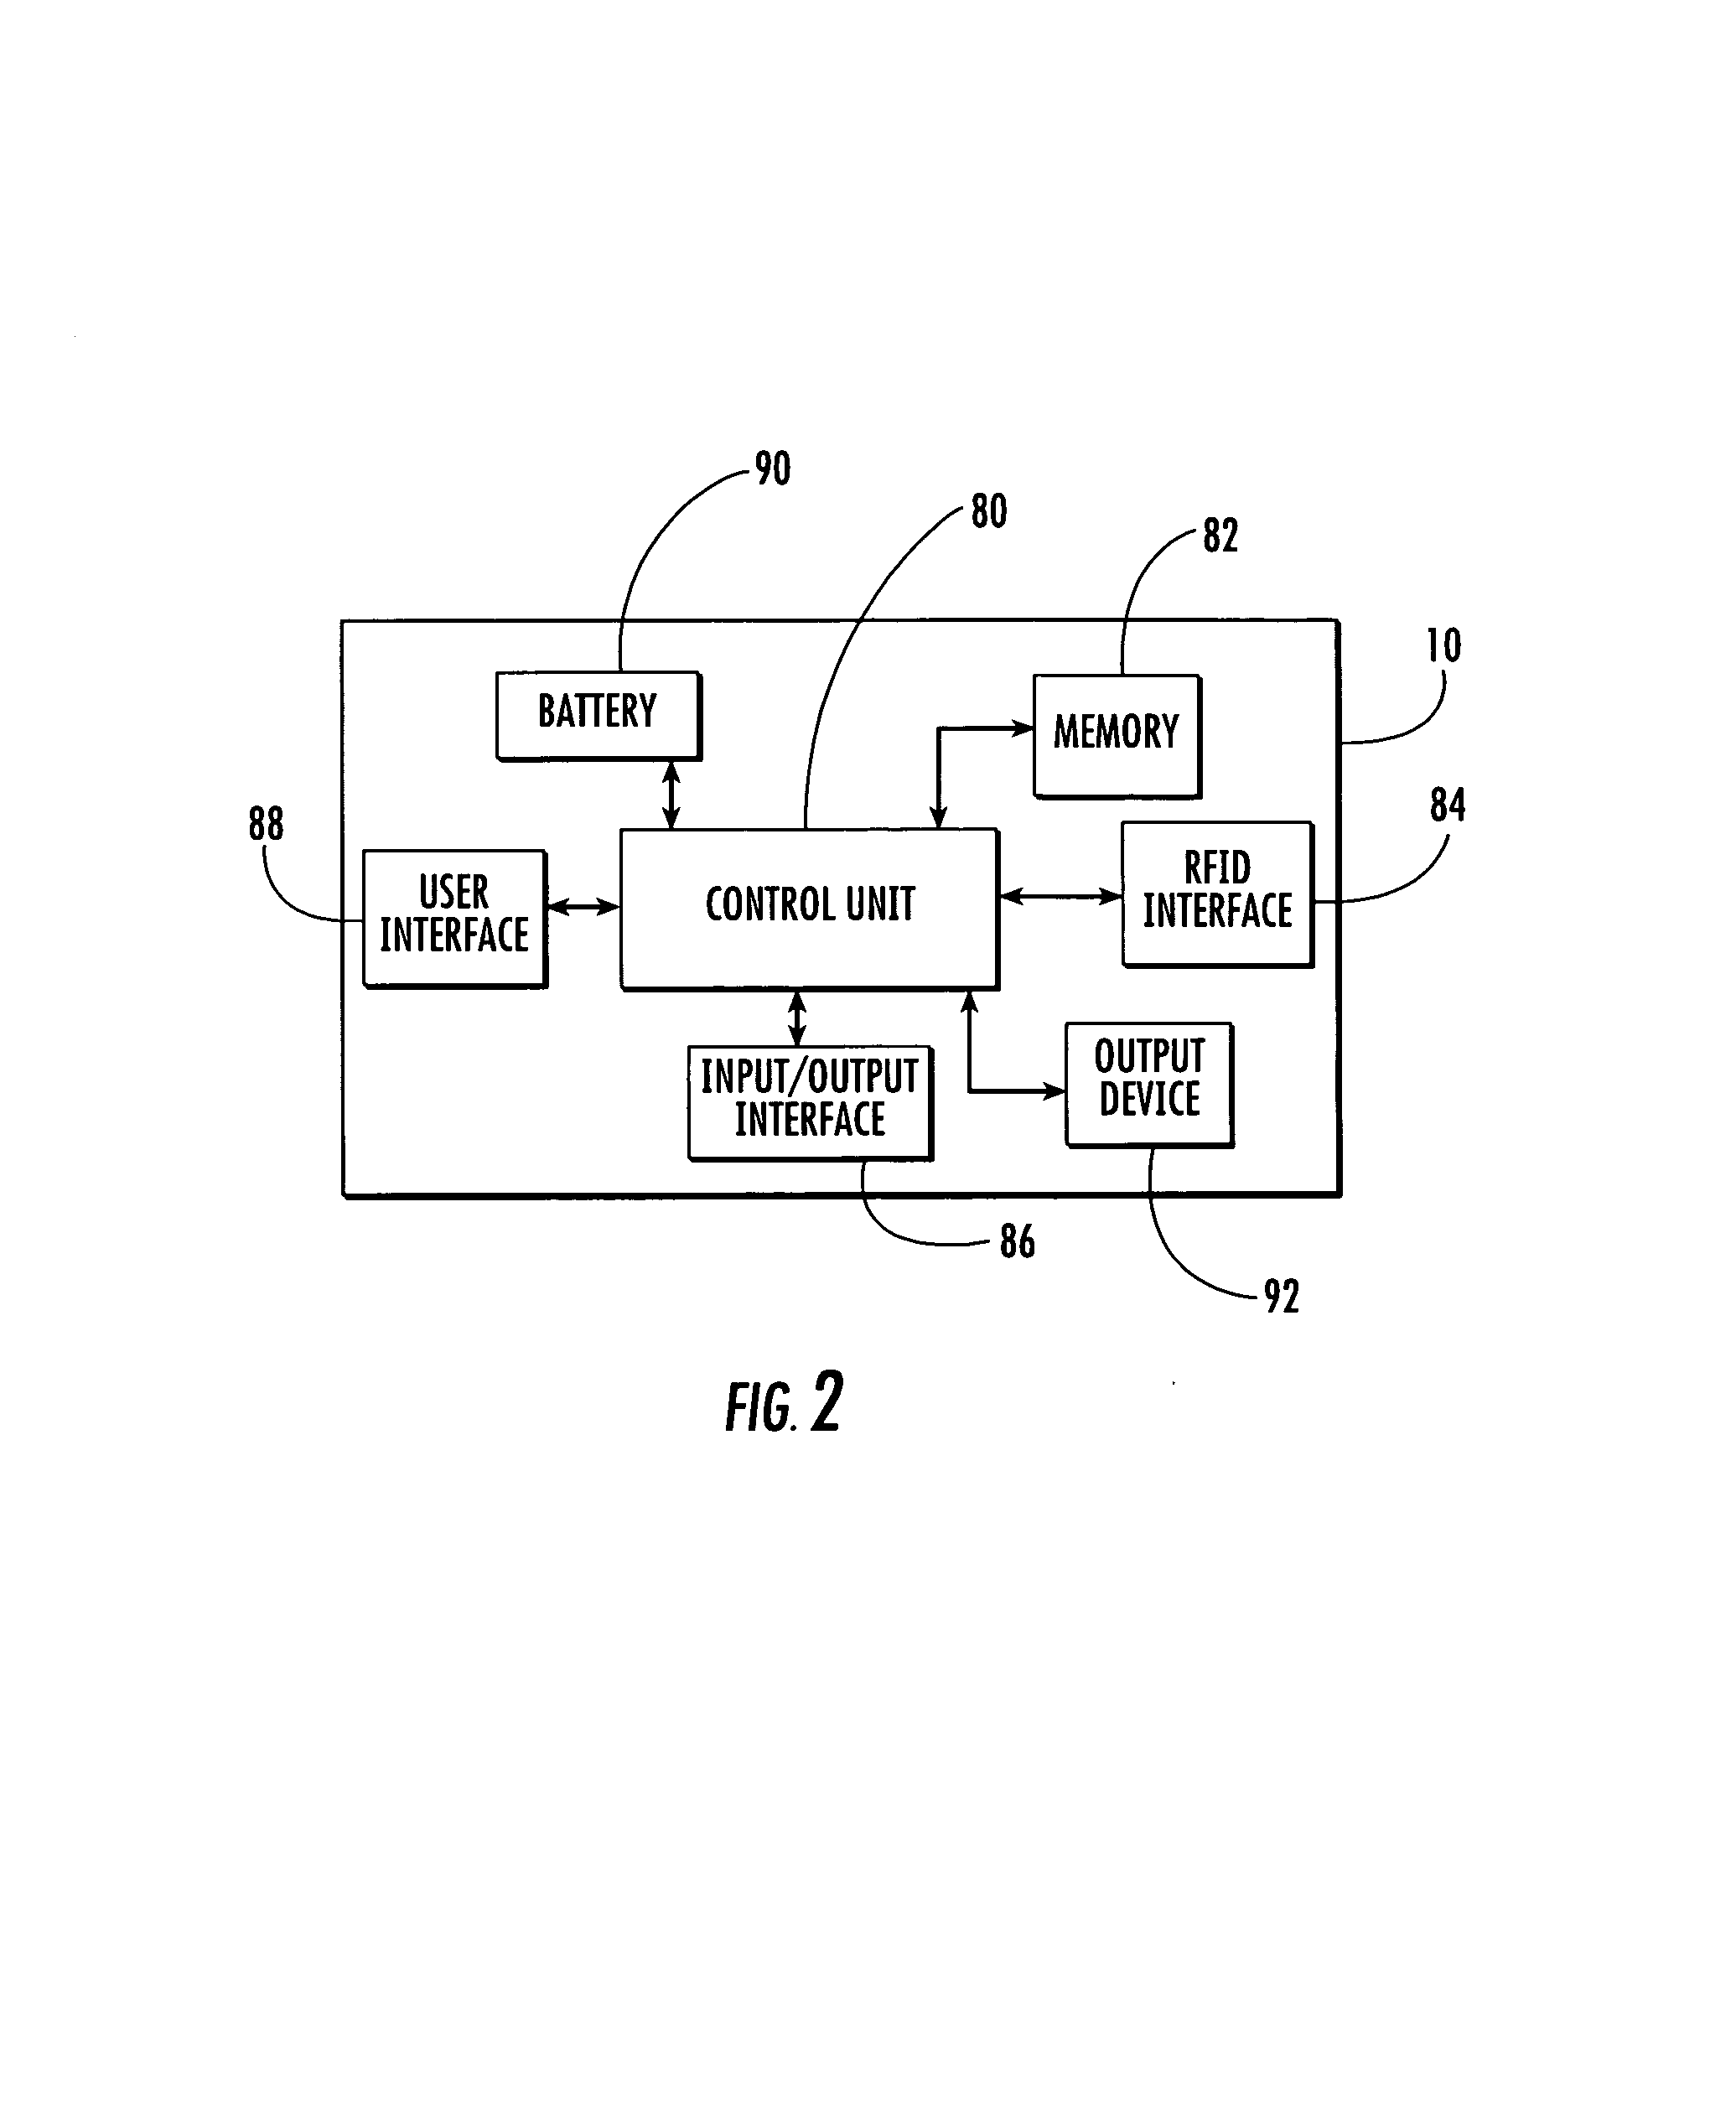 Handheld device for retrieving and analyzing data from an electronic monitoring device